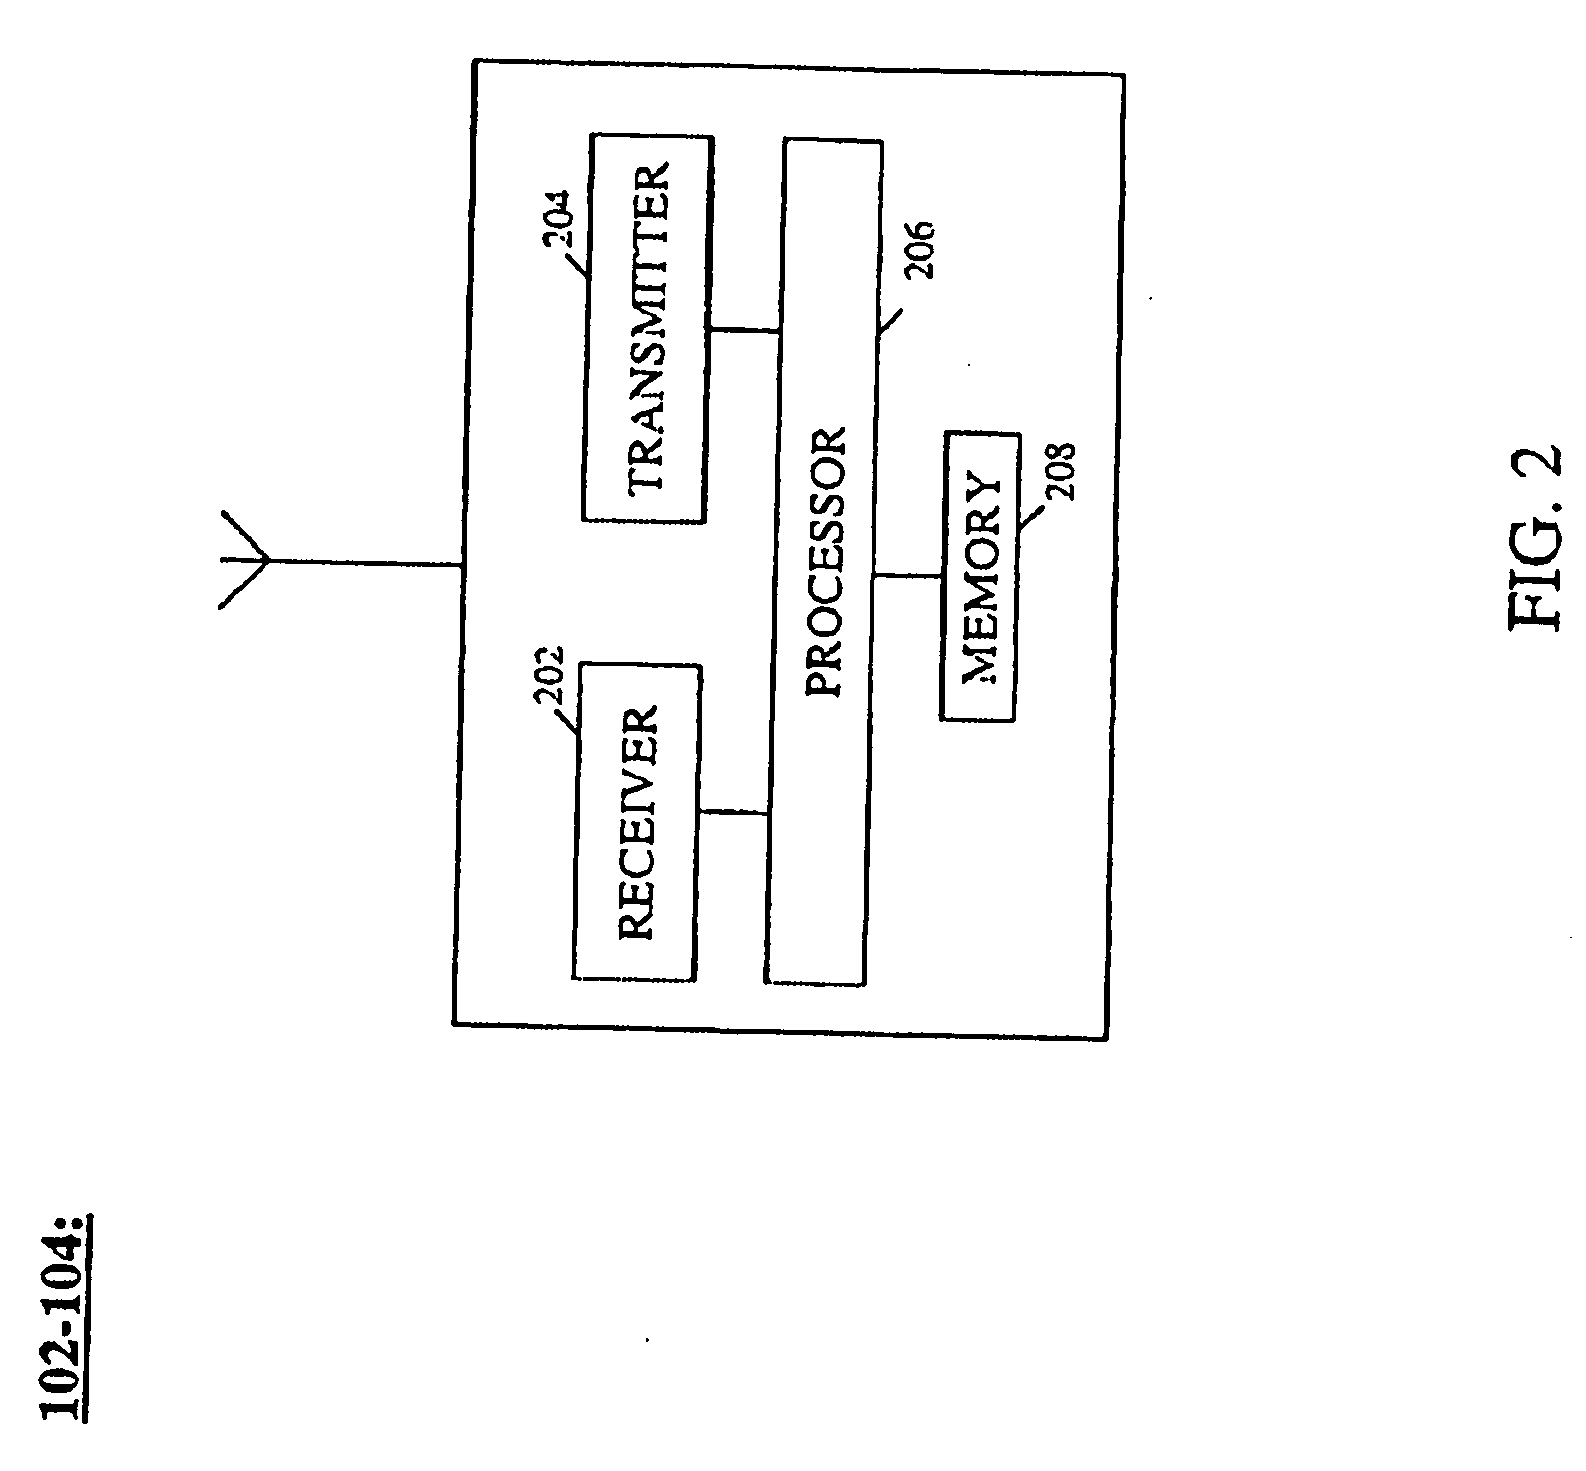 Method and apparatus for controlling access to a multimedia broadcast multicast service in a packet data communication system